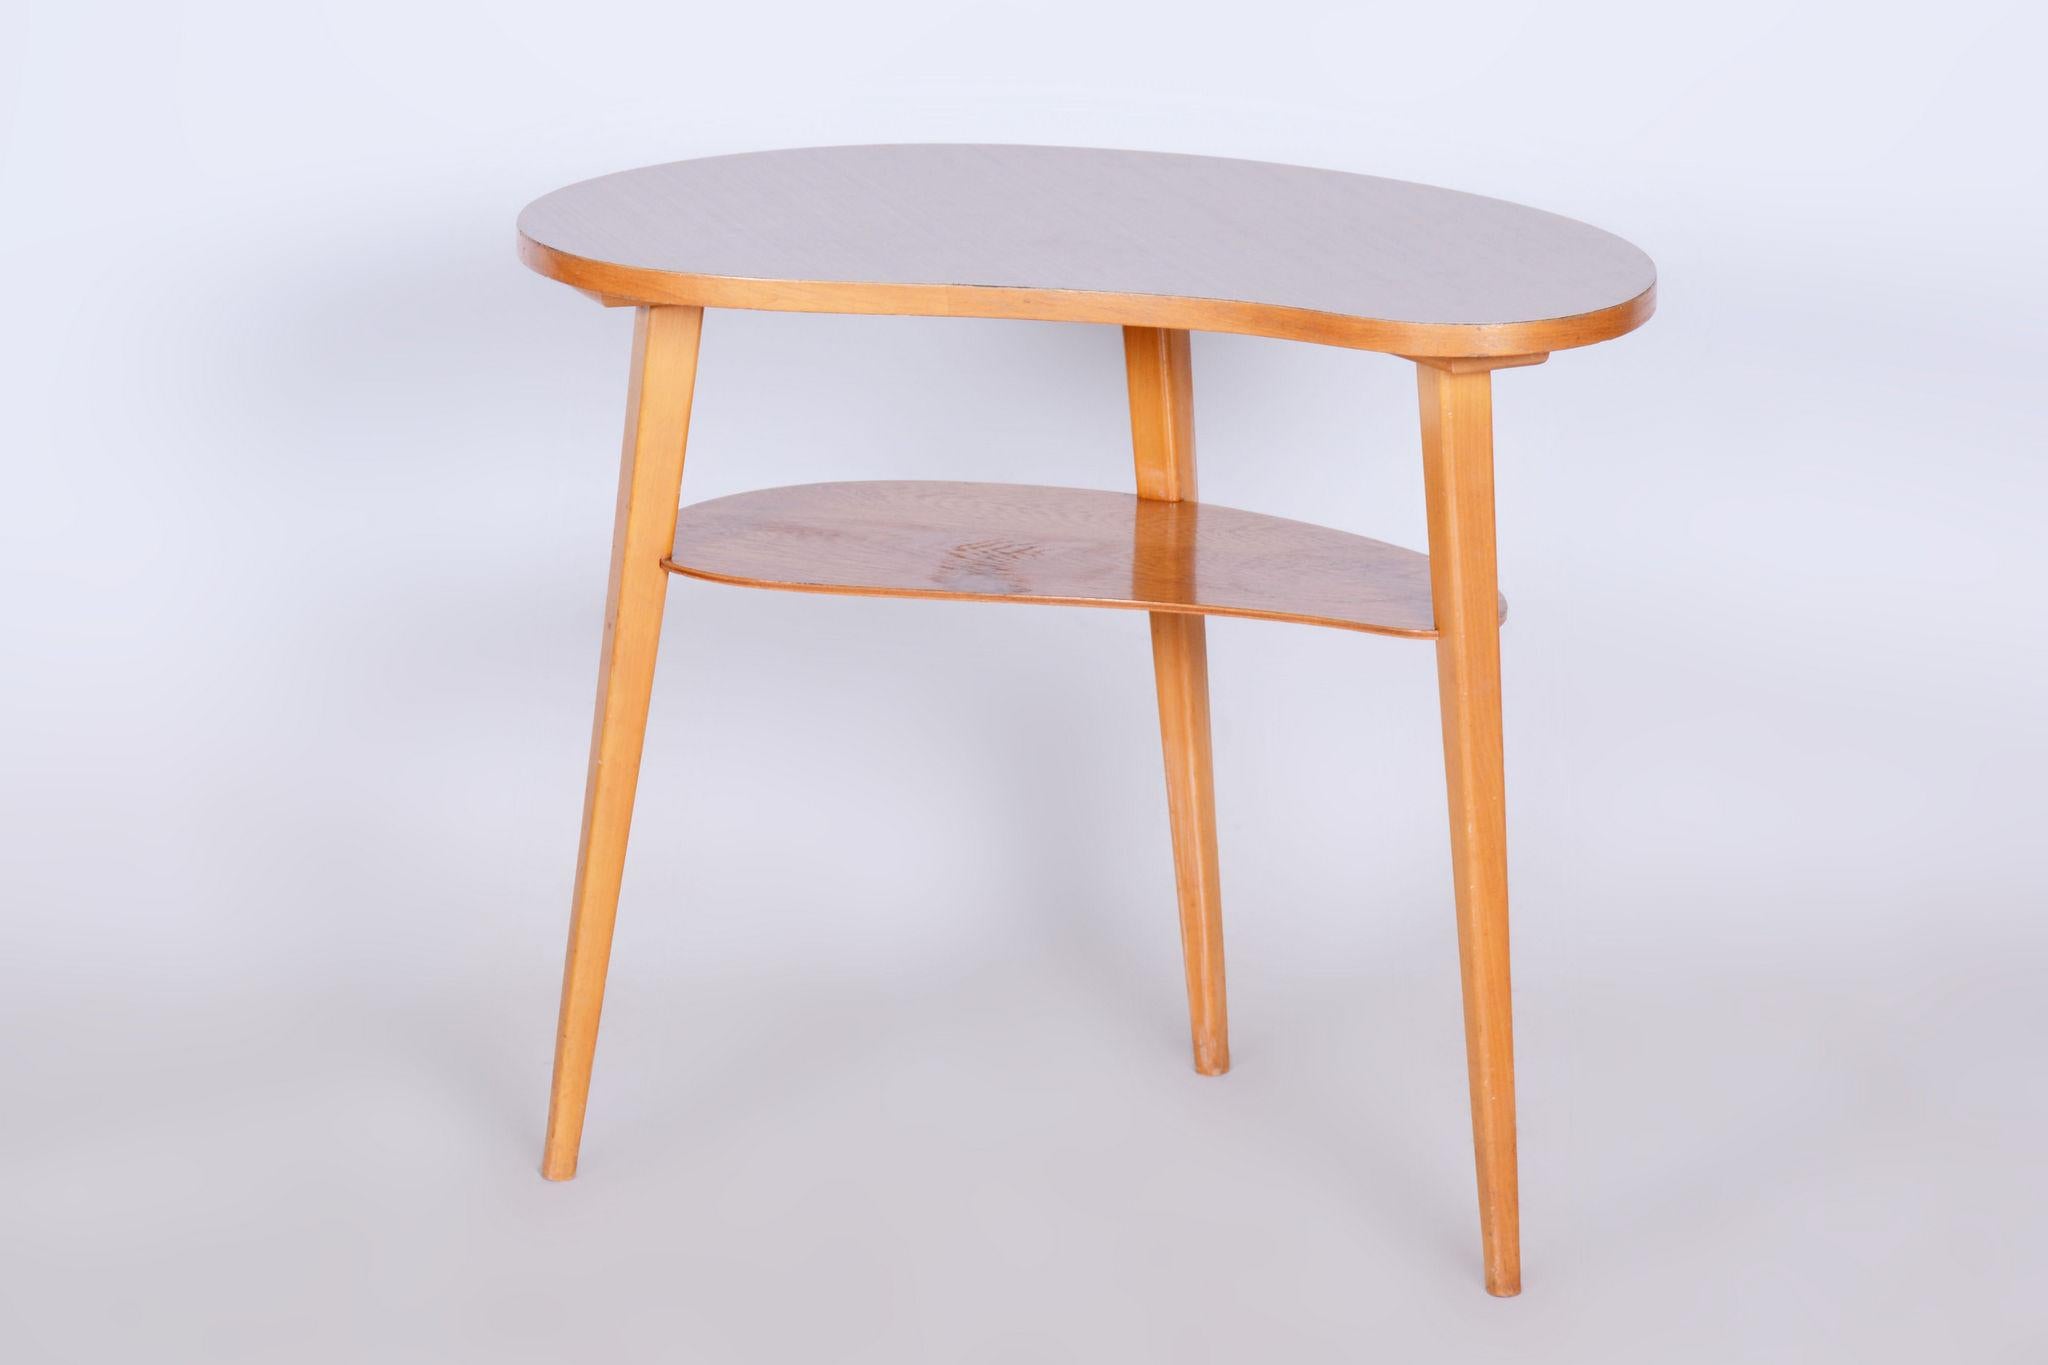 Original Beech MidCentury Small Table, Well Preserved Condition, Czechia, 1950s For Sale 2